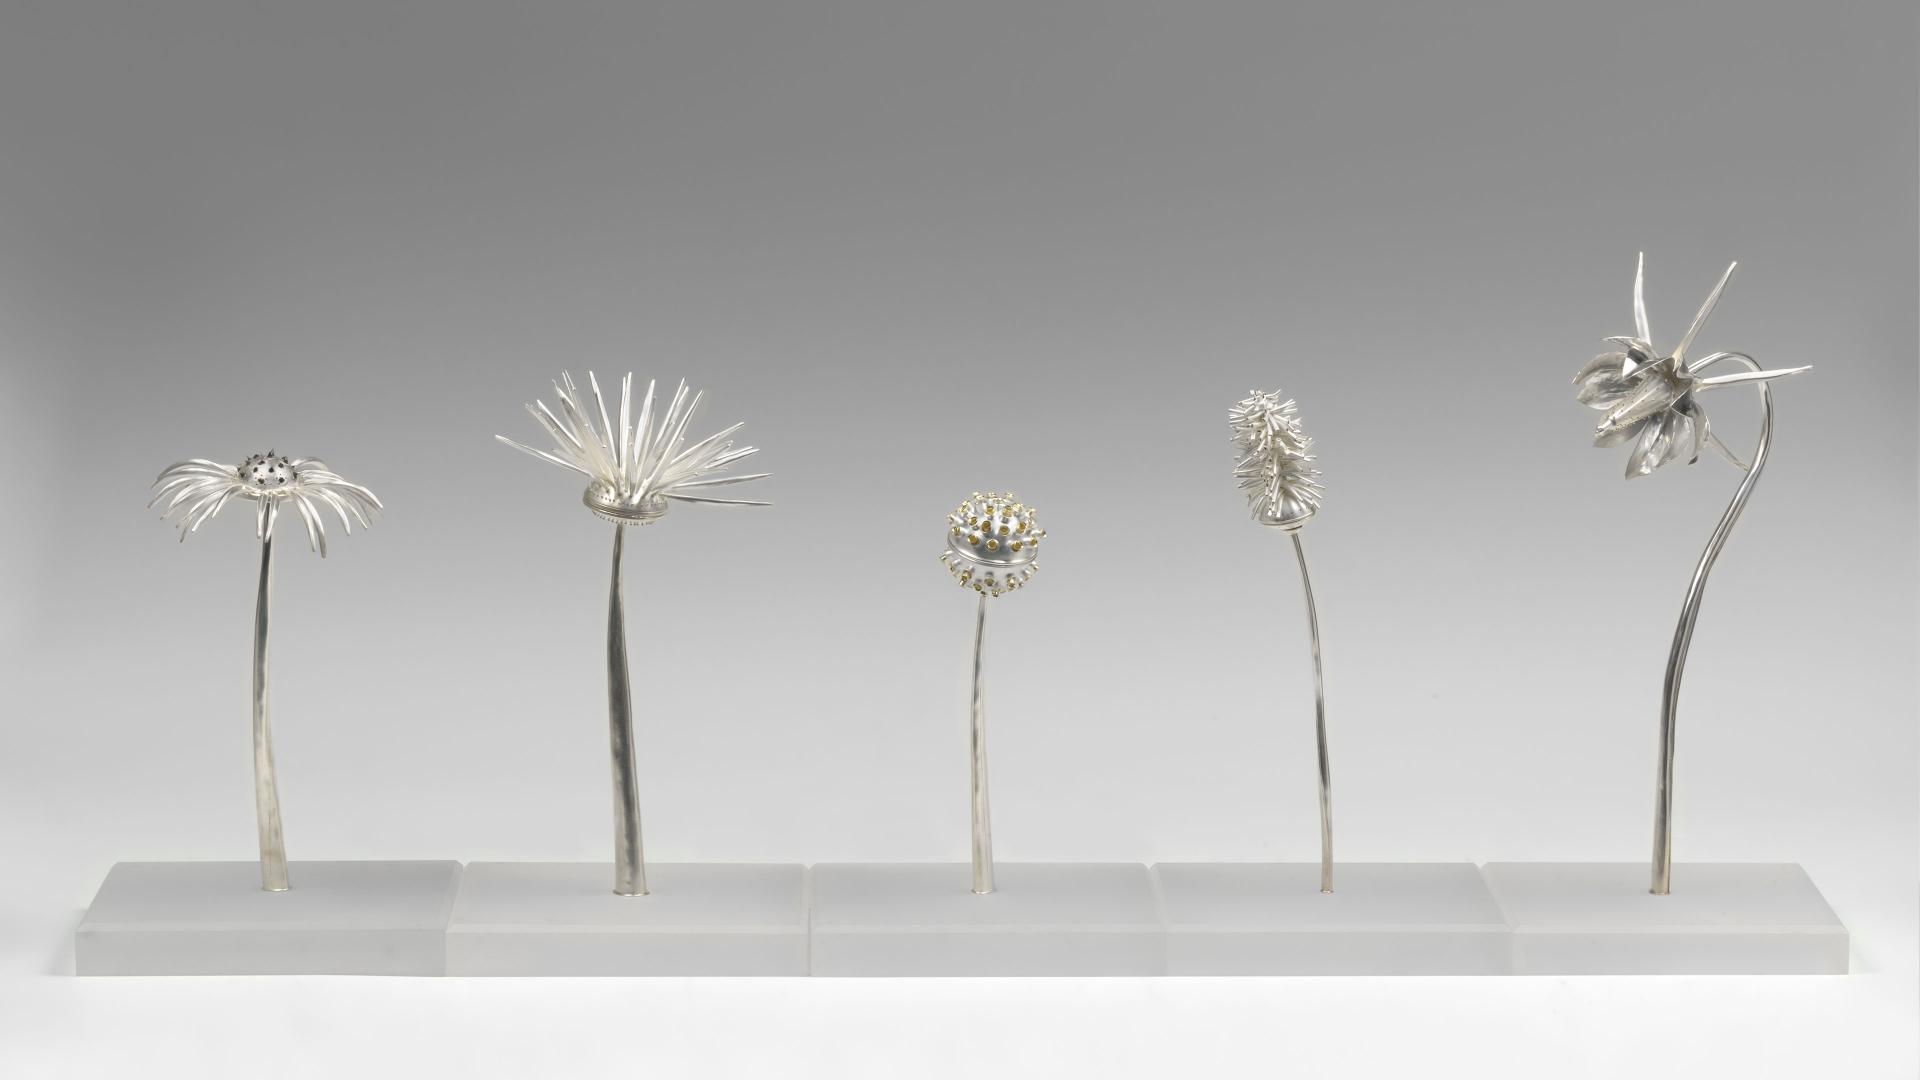 Five silver and gold spice boxes imitating wild flowers